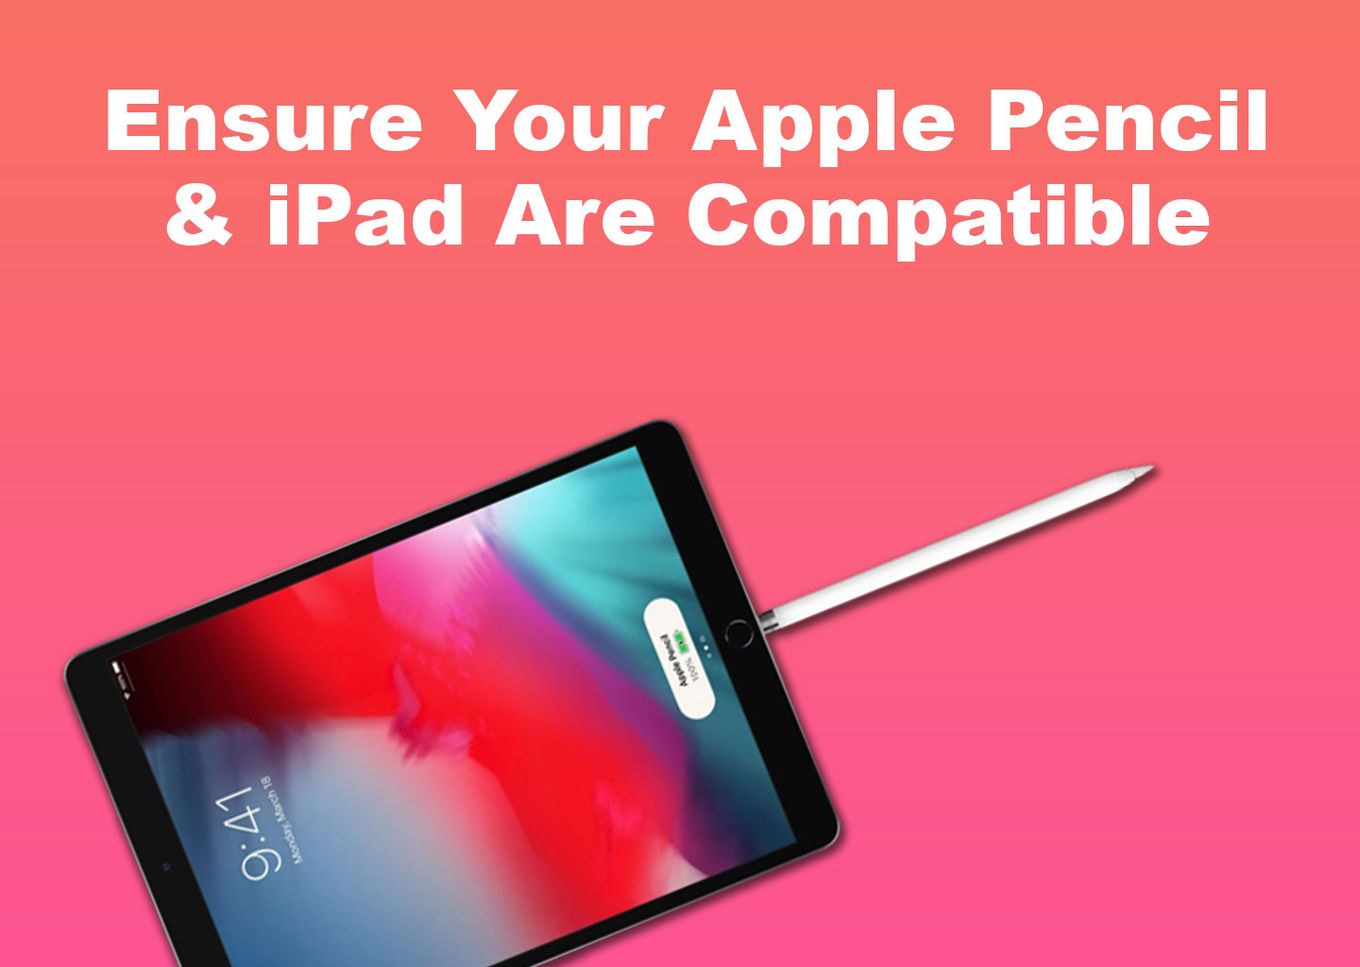 Ensuring that your Apple Pencil and iPad are compatible